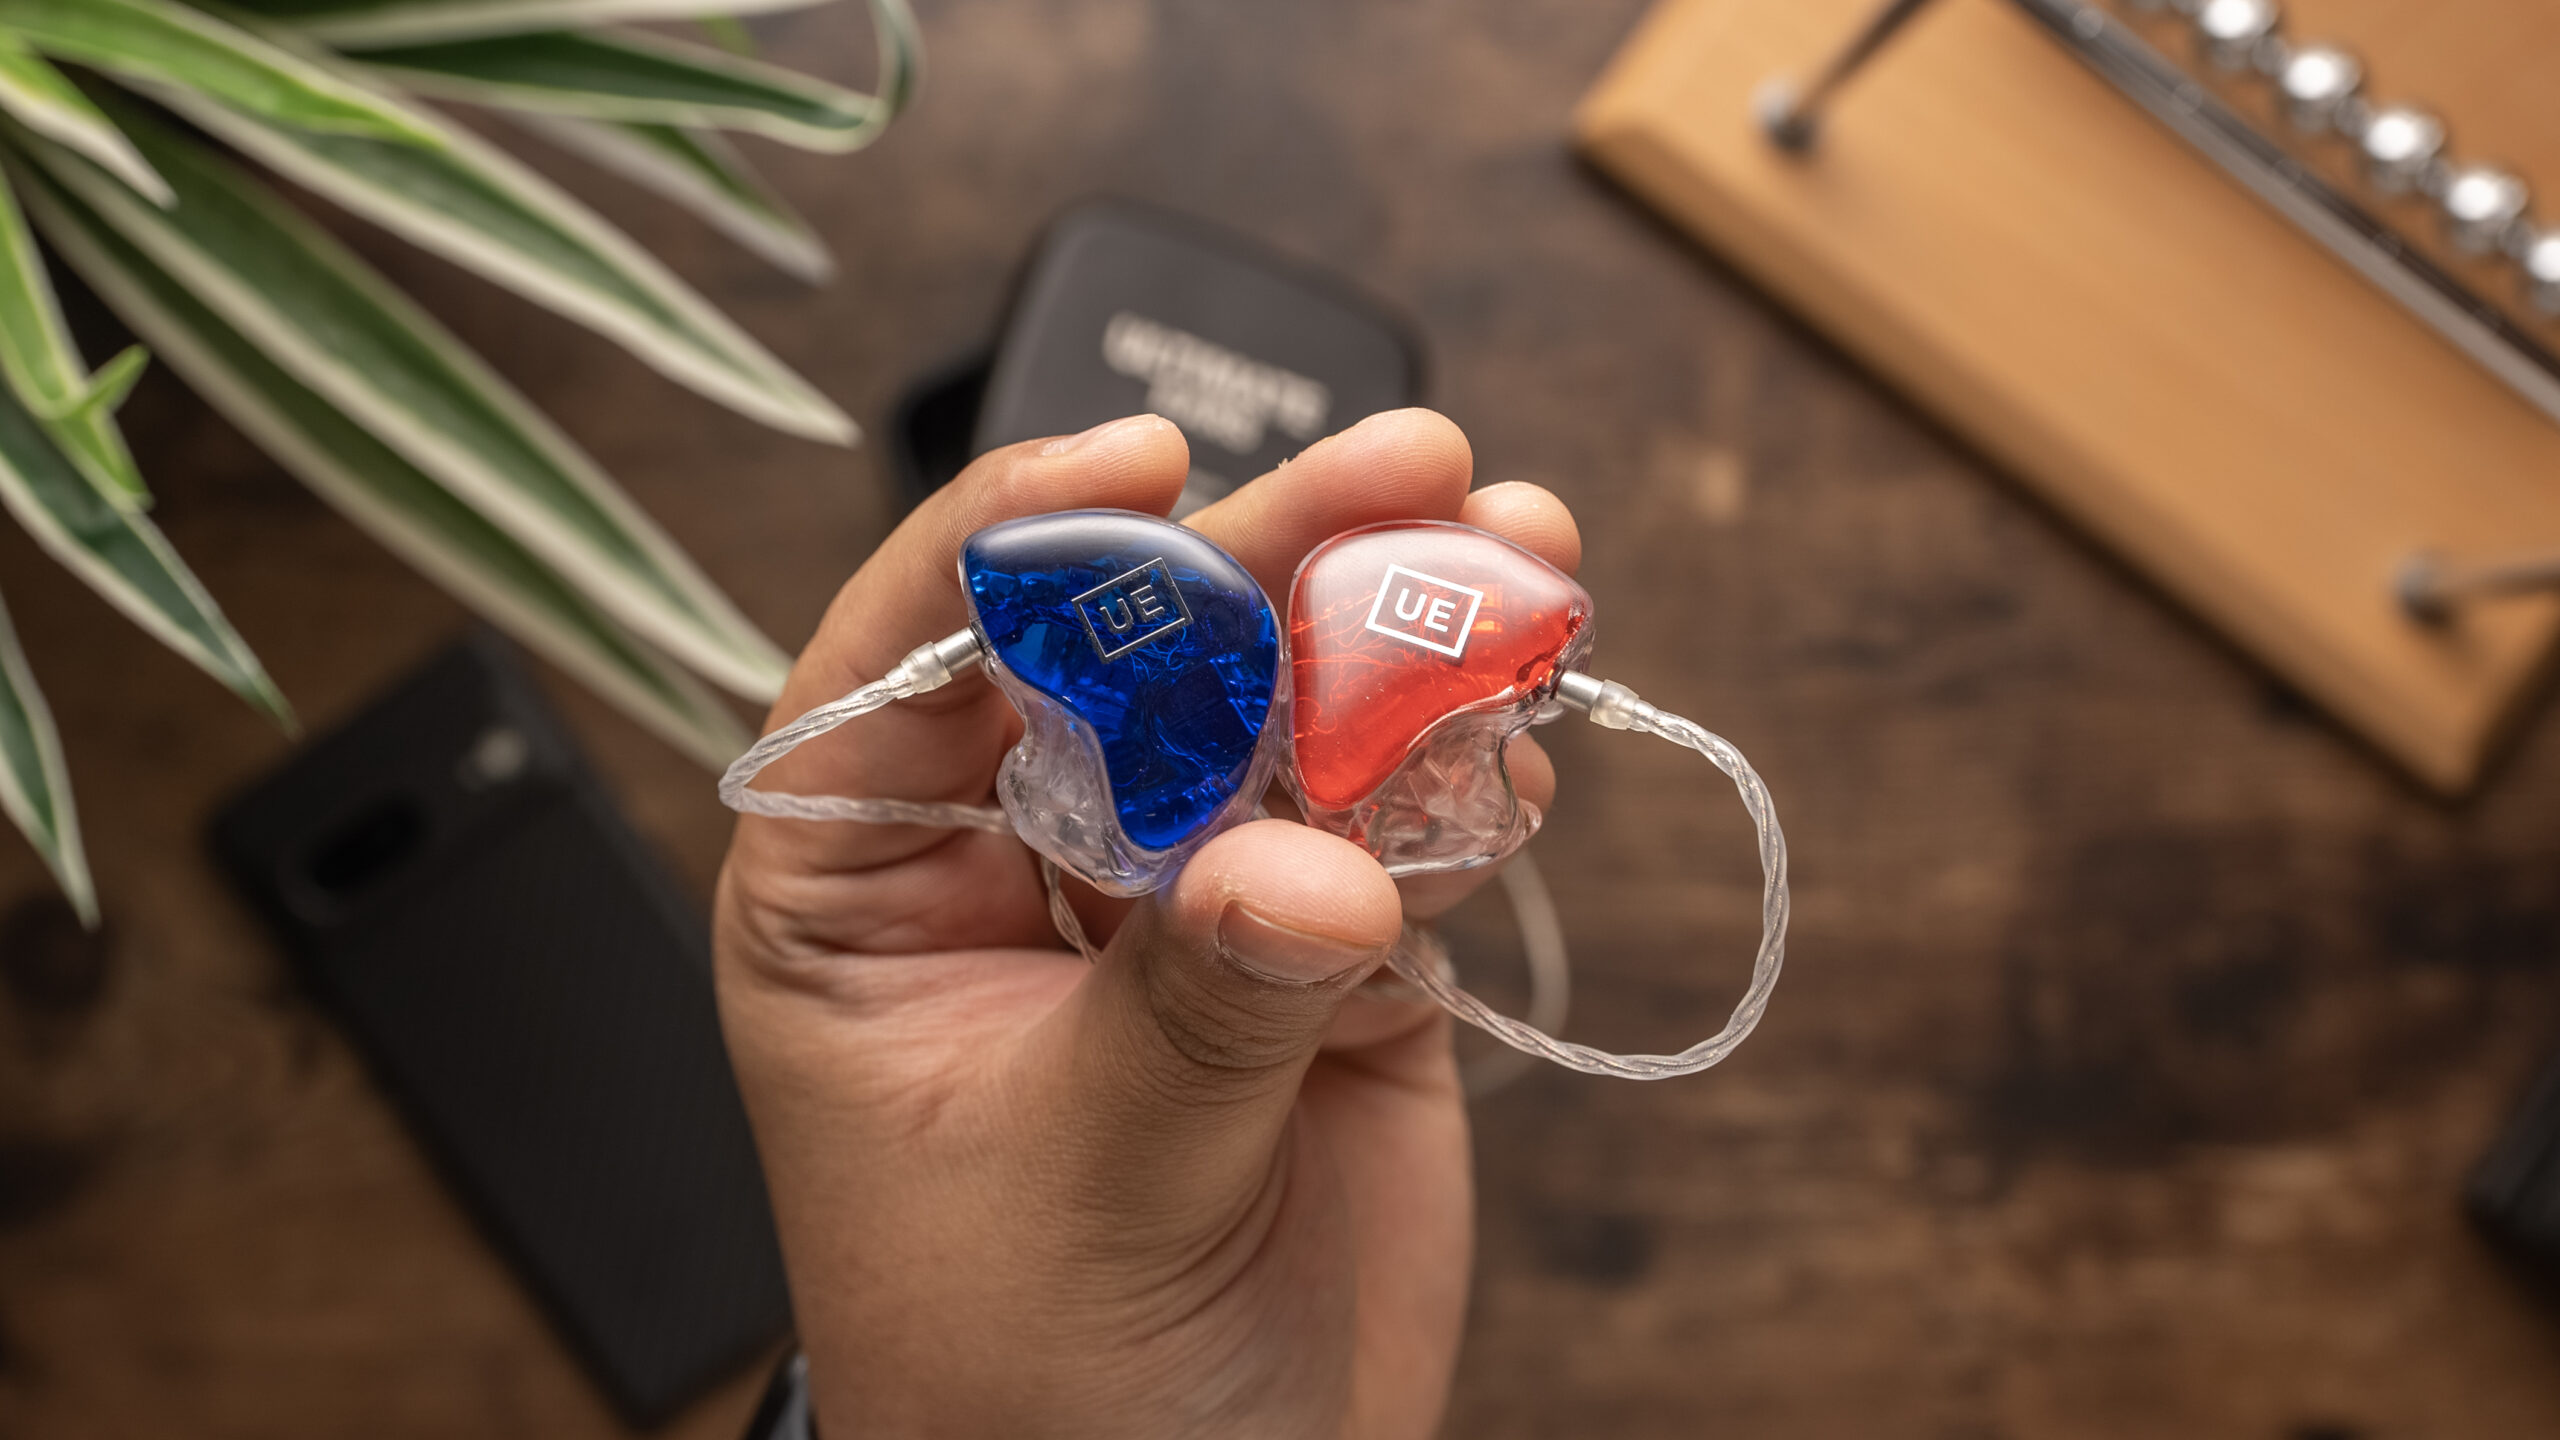 Ultimate Ears UE Premier left and right units held in fingers.